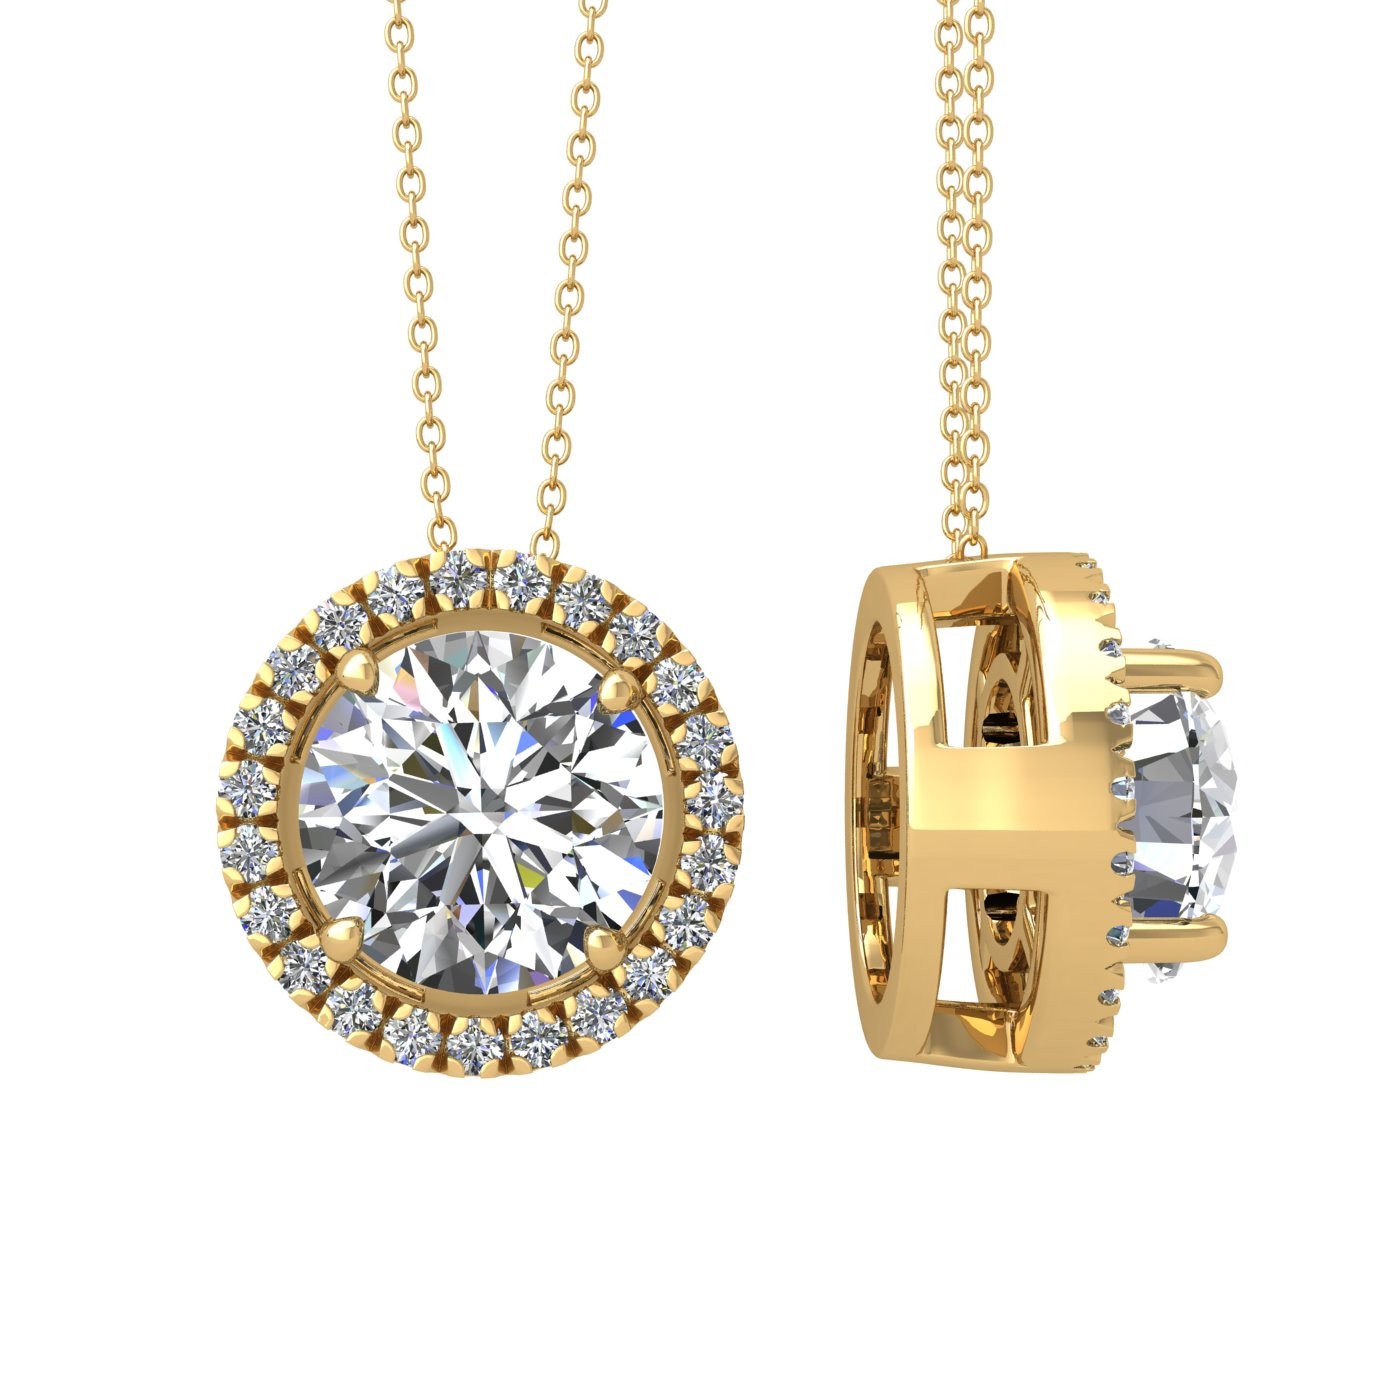 18k yellow gold 0,5 ct 4 prong round shape diamond pendant with diamond pavÉ set halo including chain seperate from the pendant Photos & images